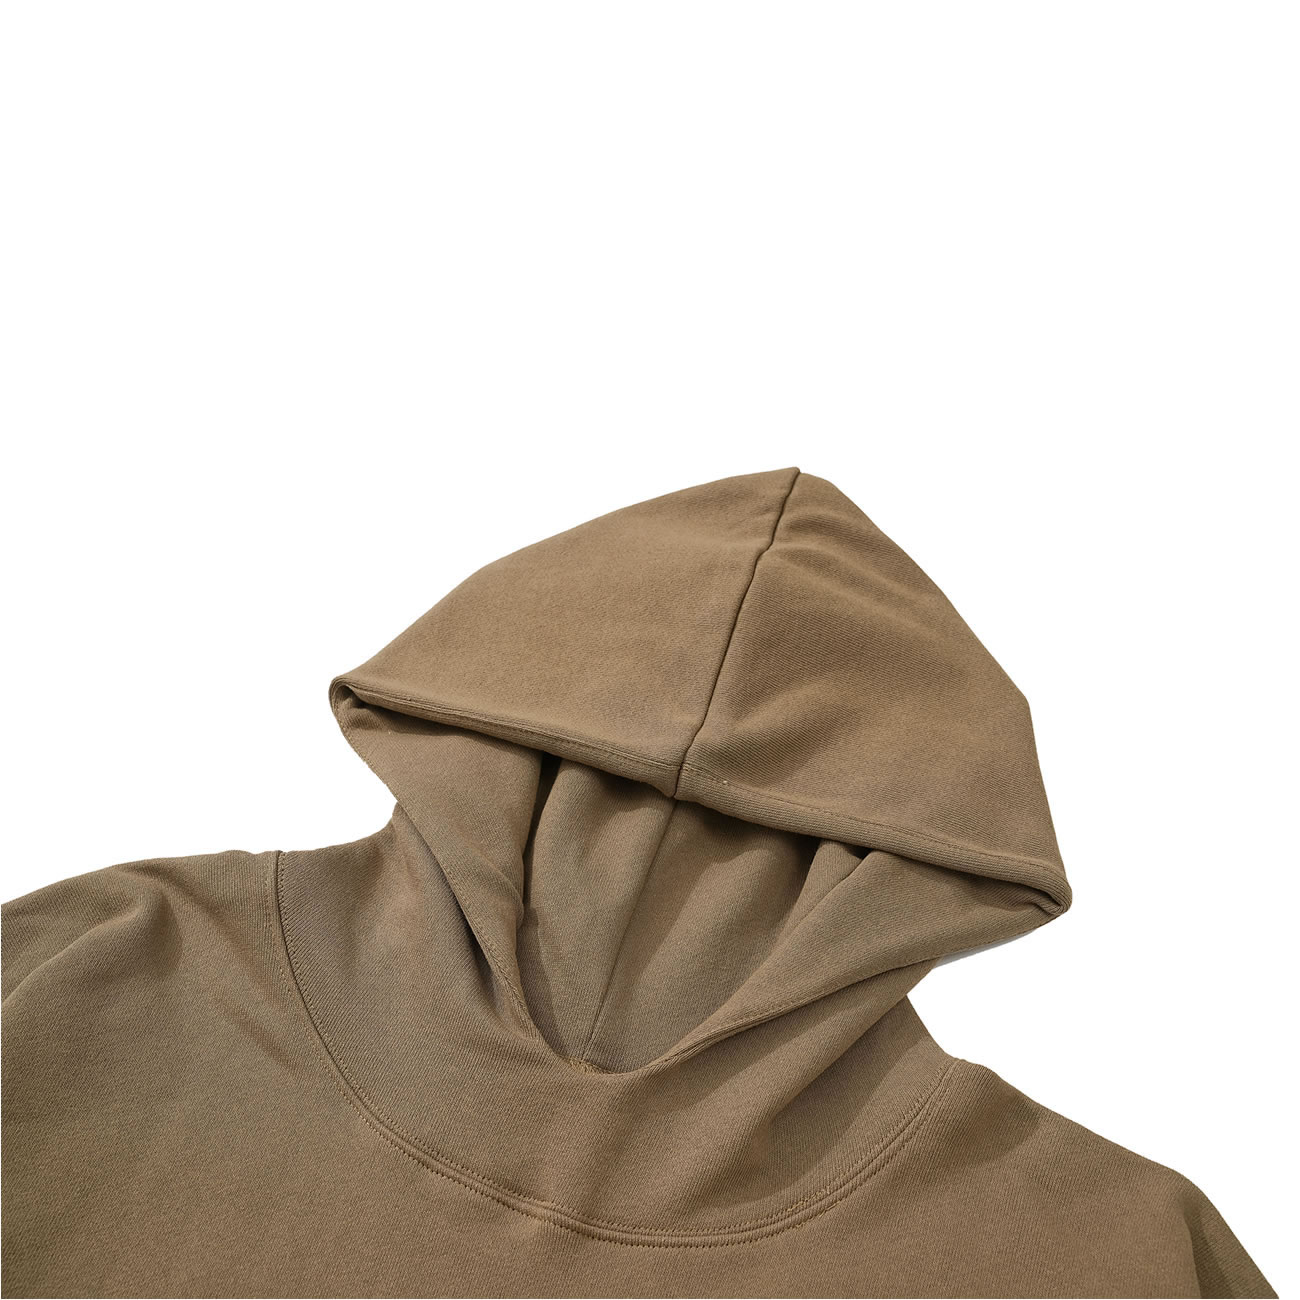 Yeezy Gap Engineered by Balenciaga Dove Hoodie Washed Black SS22